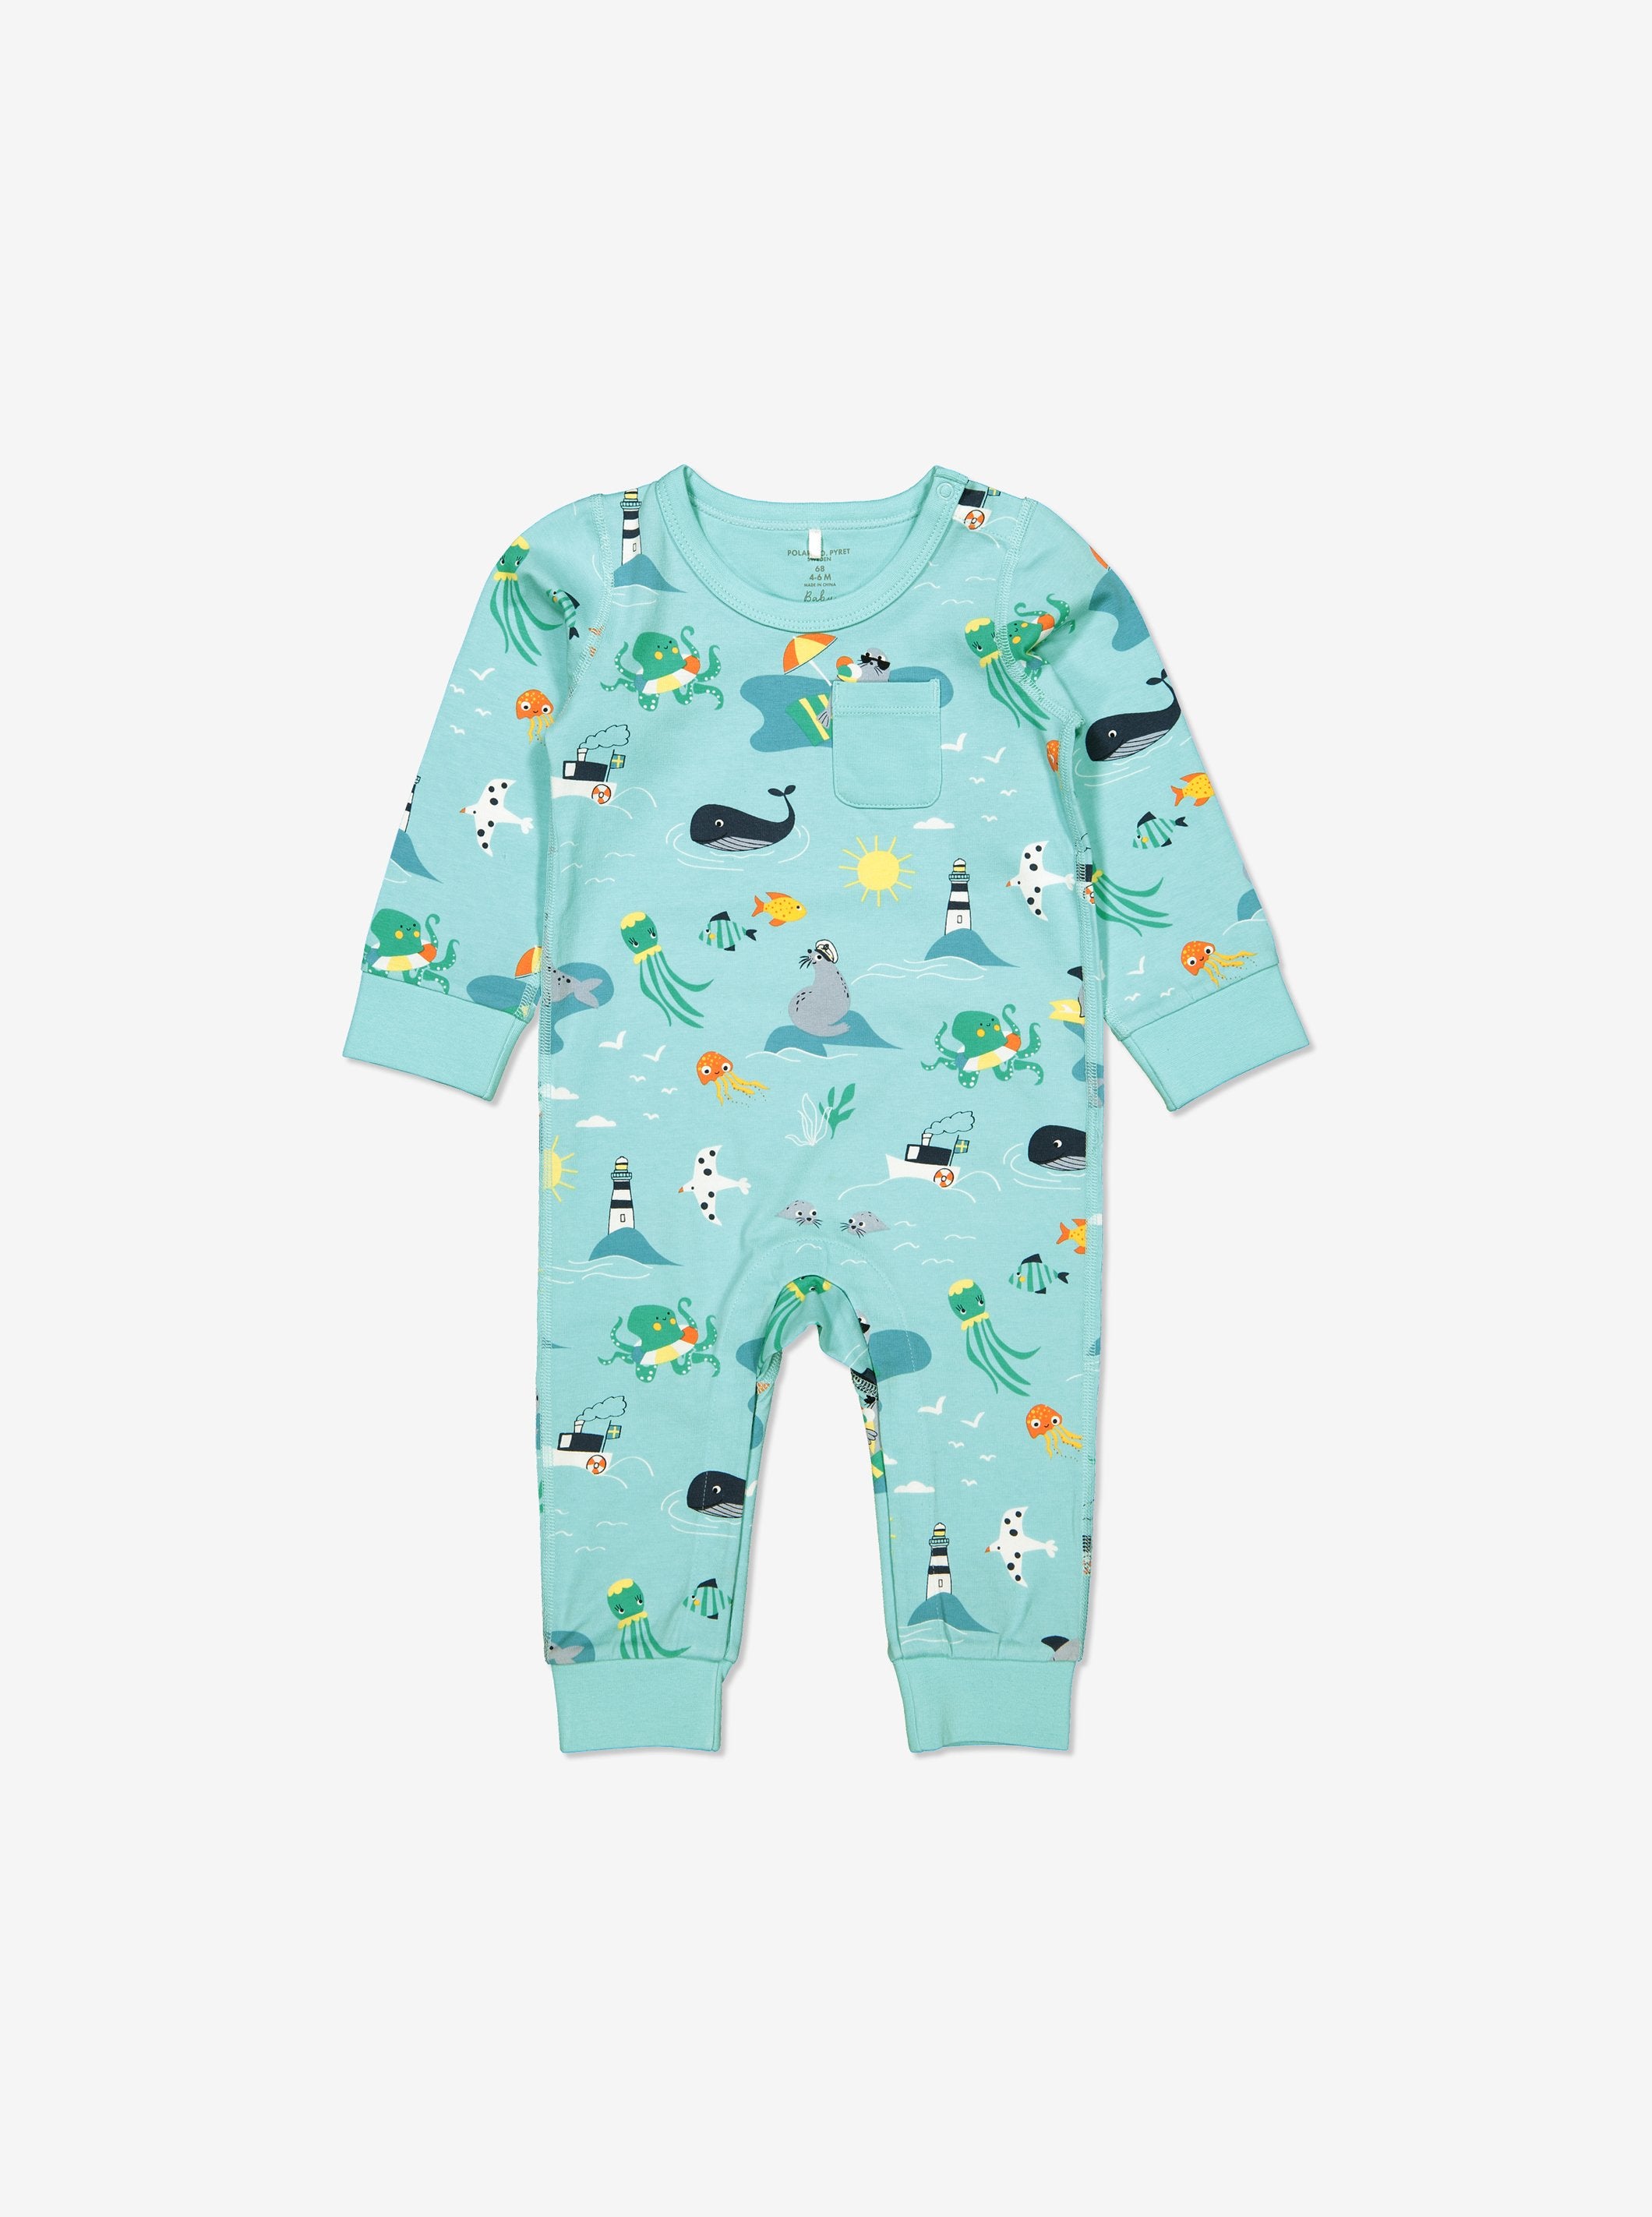 Seaside Print Baby All in one